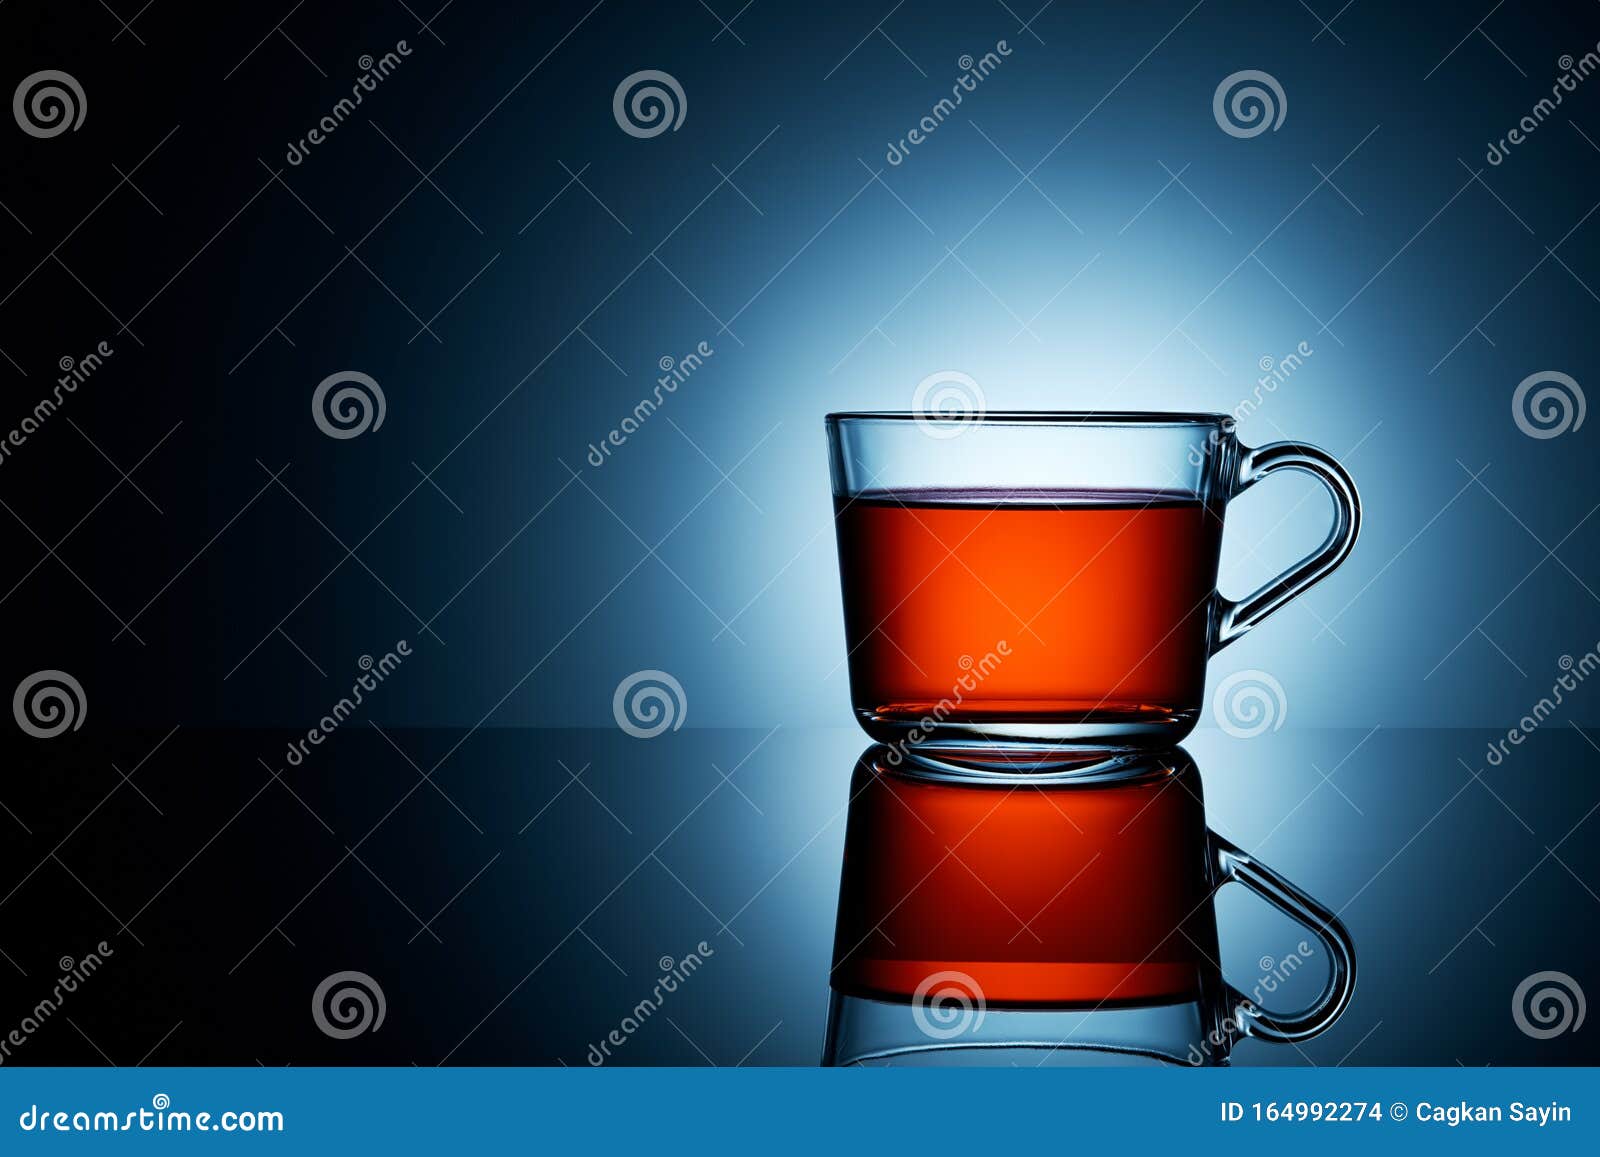 Tea in a Transparent Tea Cup Stock Photo - Image of colors, shoot: 164992274